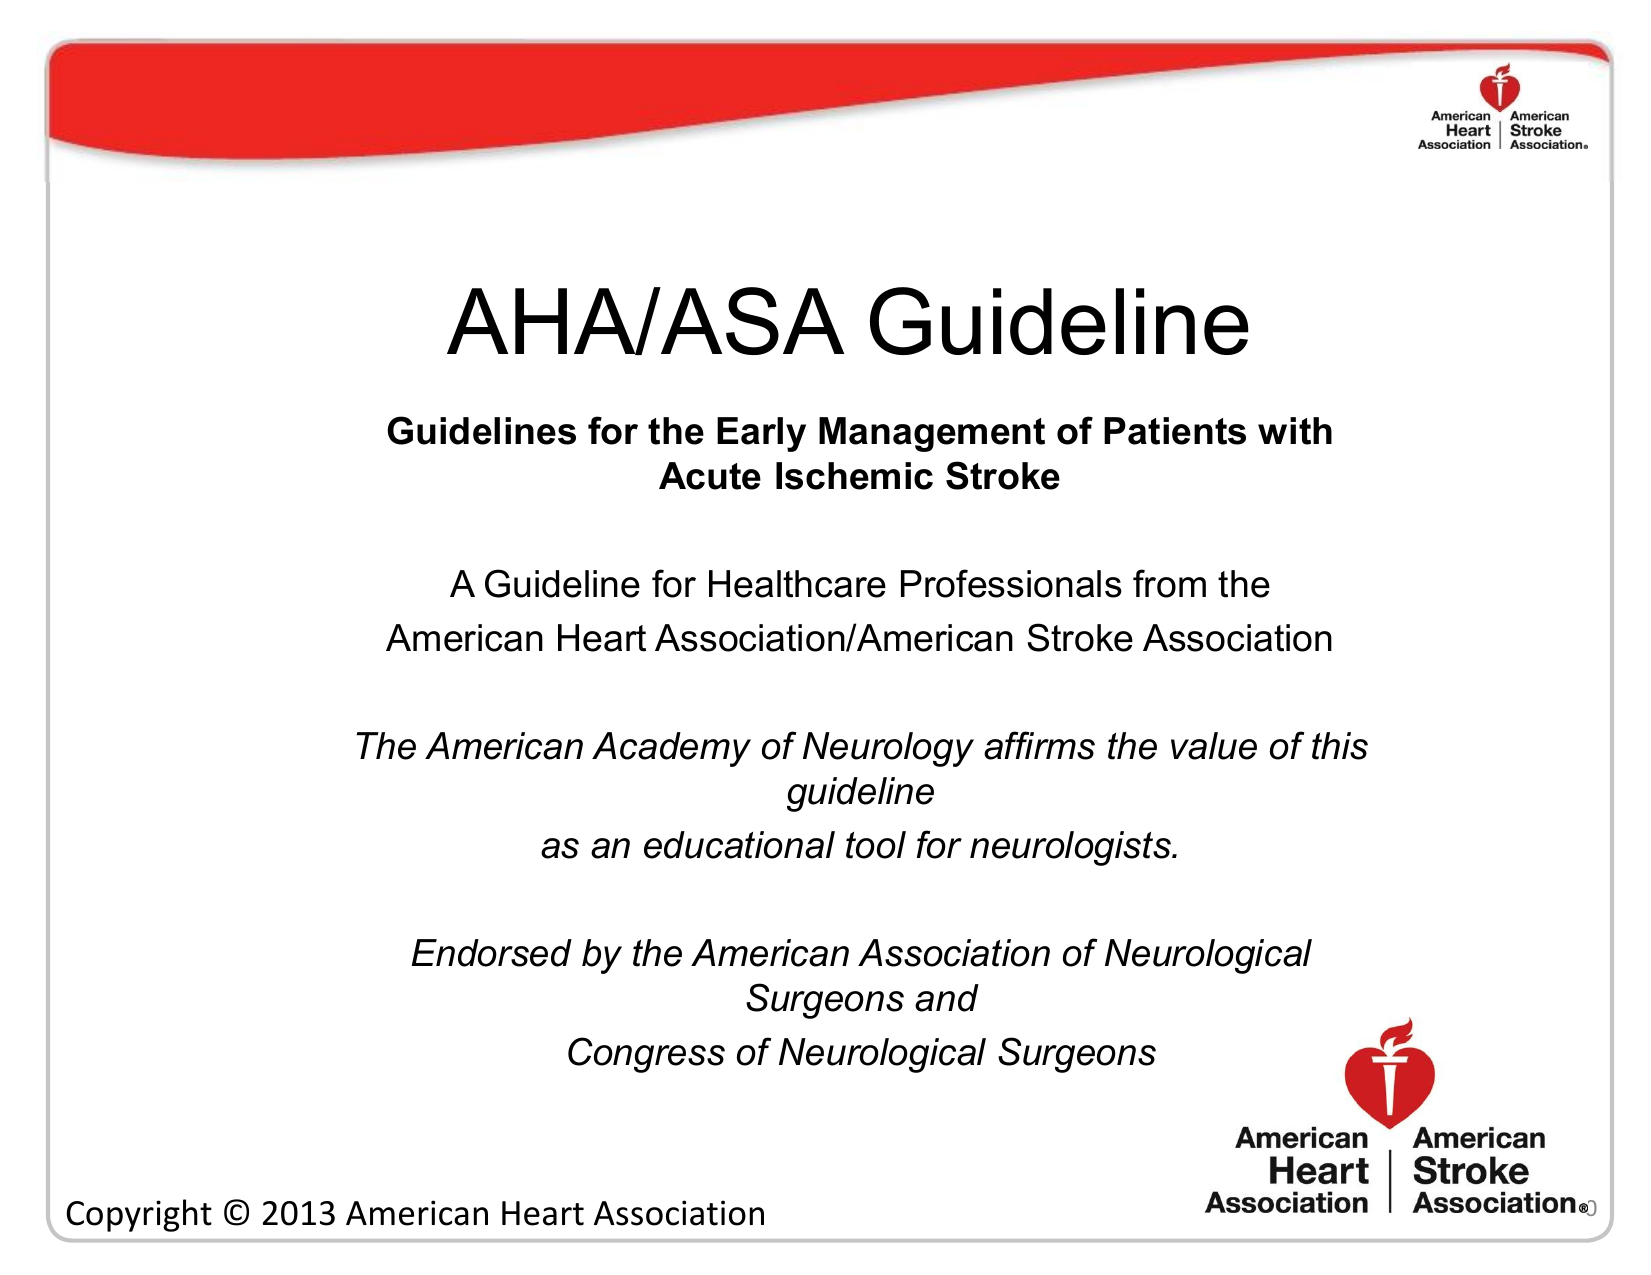 Guidelines for the Early Management of Patients with Acute Ischemic